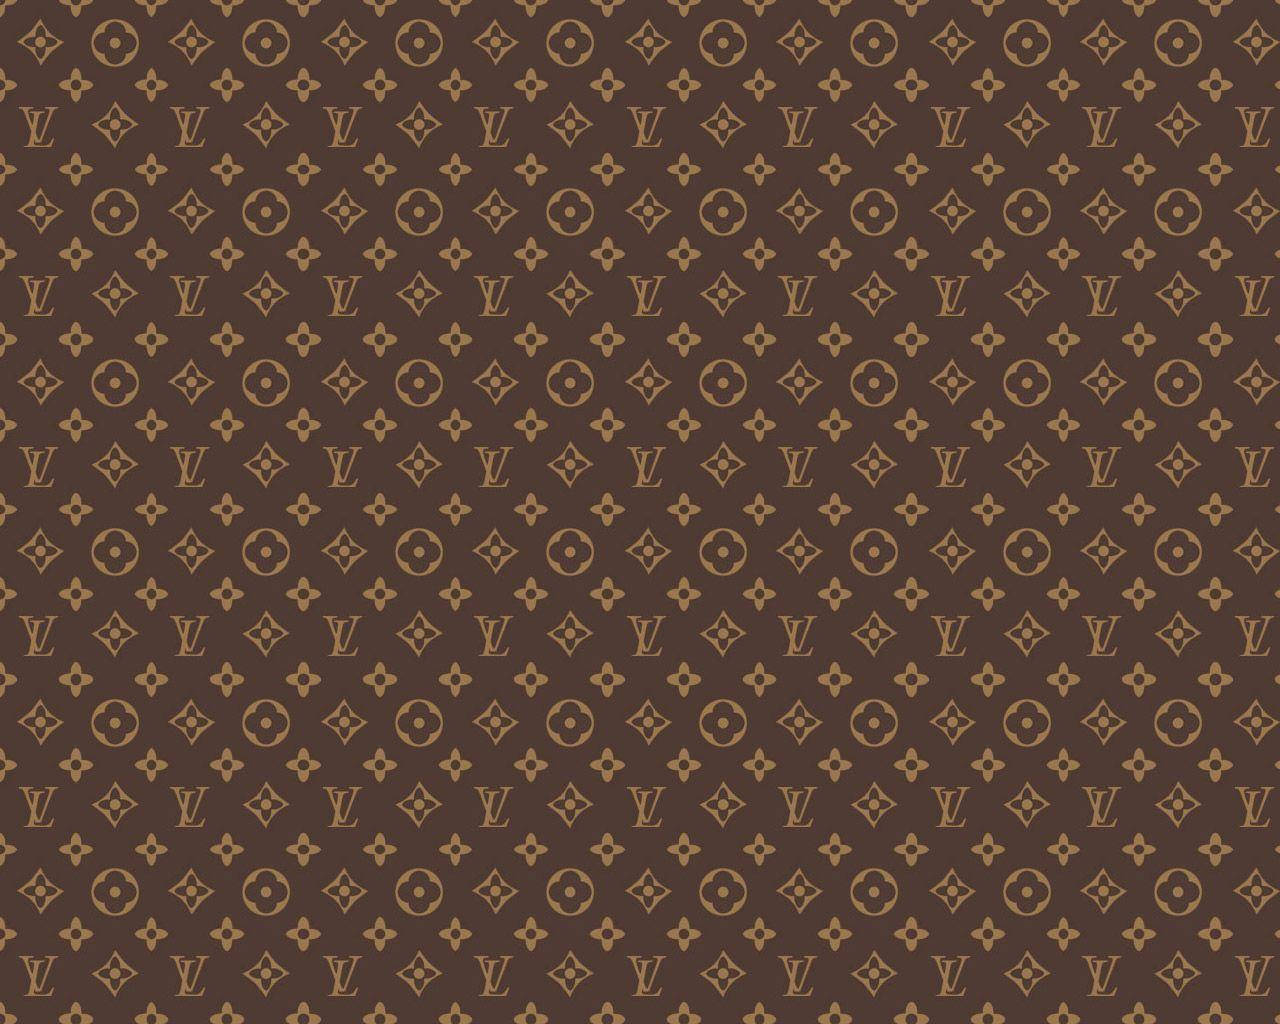 Vintage elegance - the iconic Louis Vuitton trunk in all its glory. Wallpaper